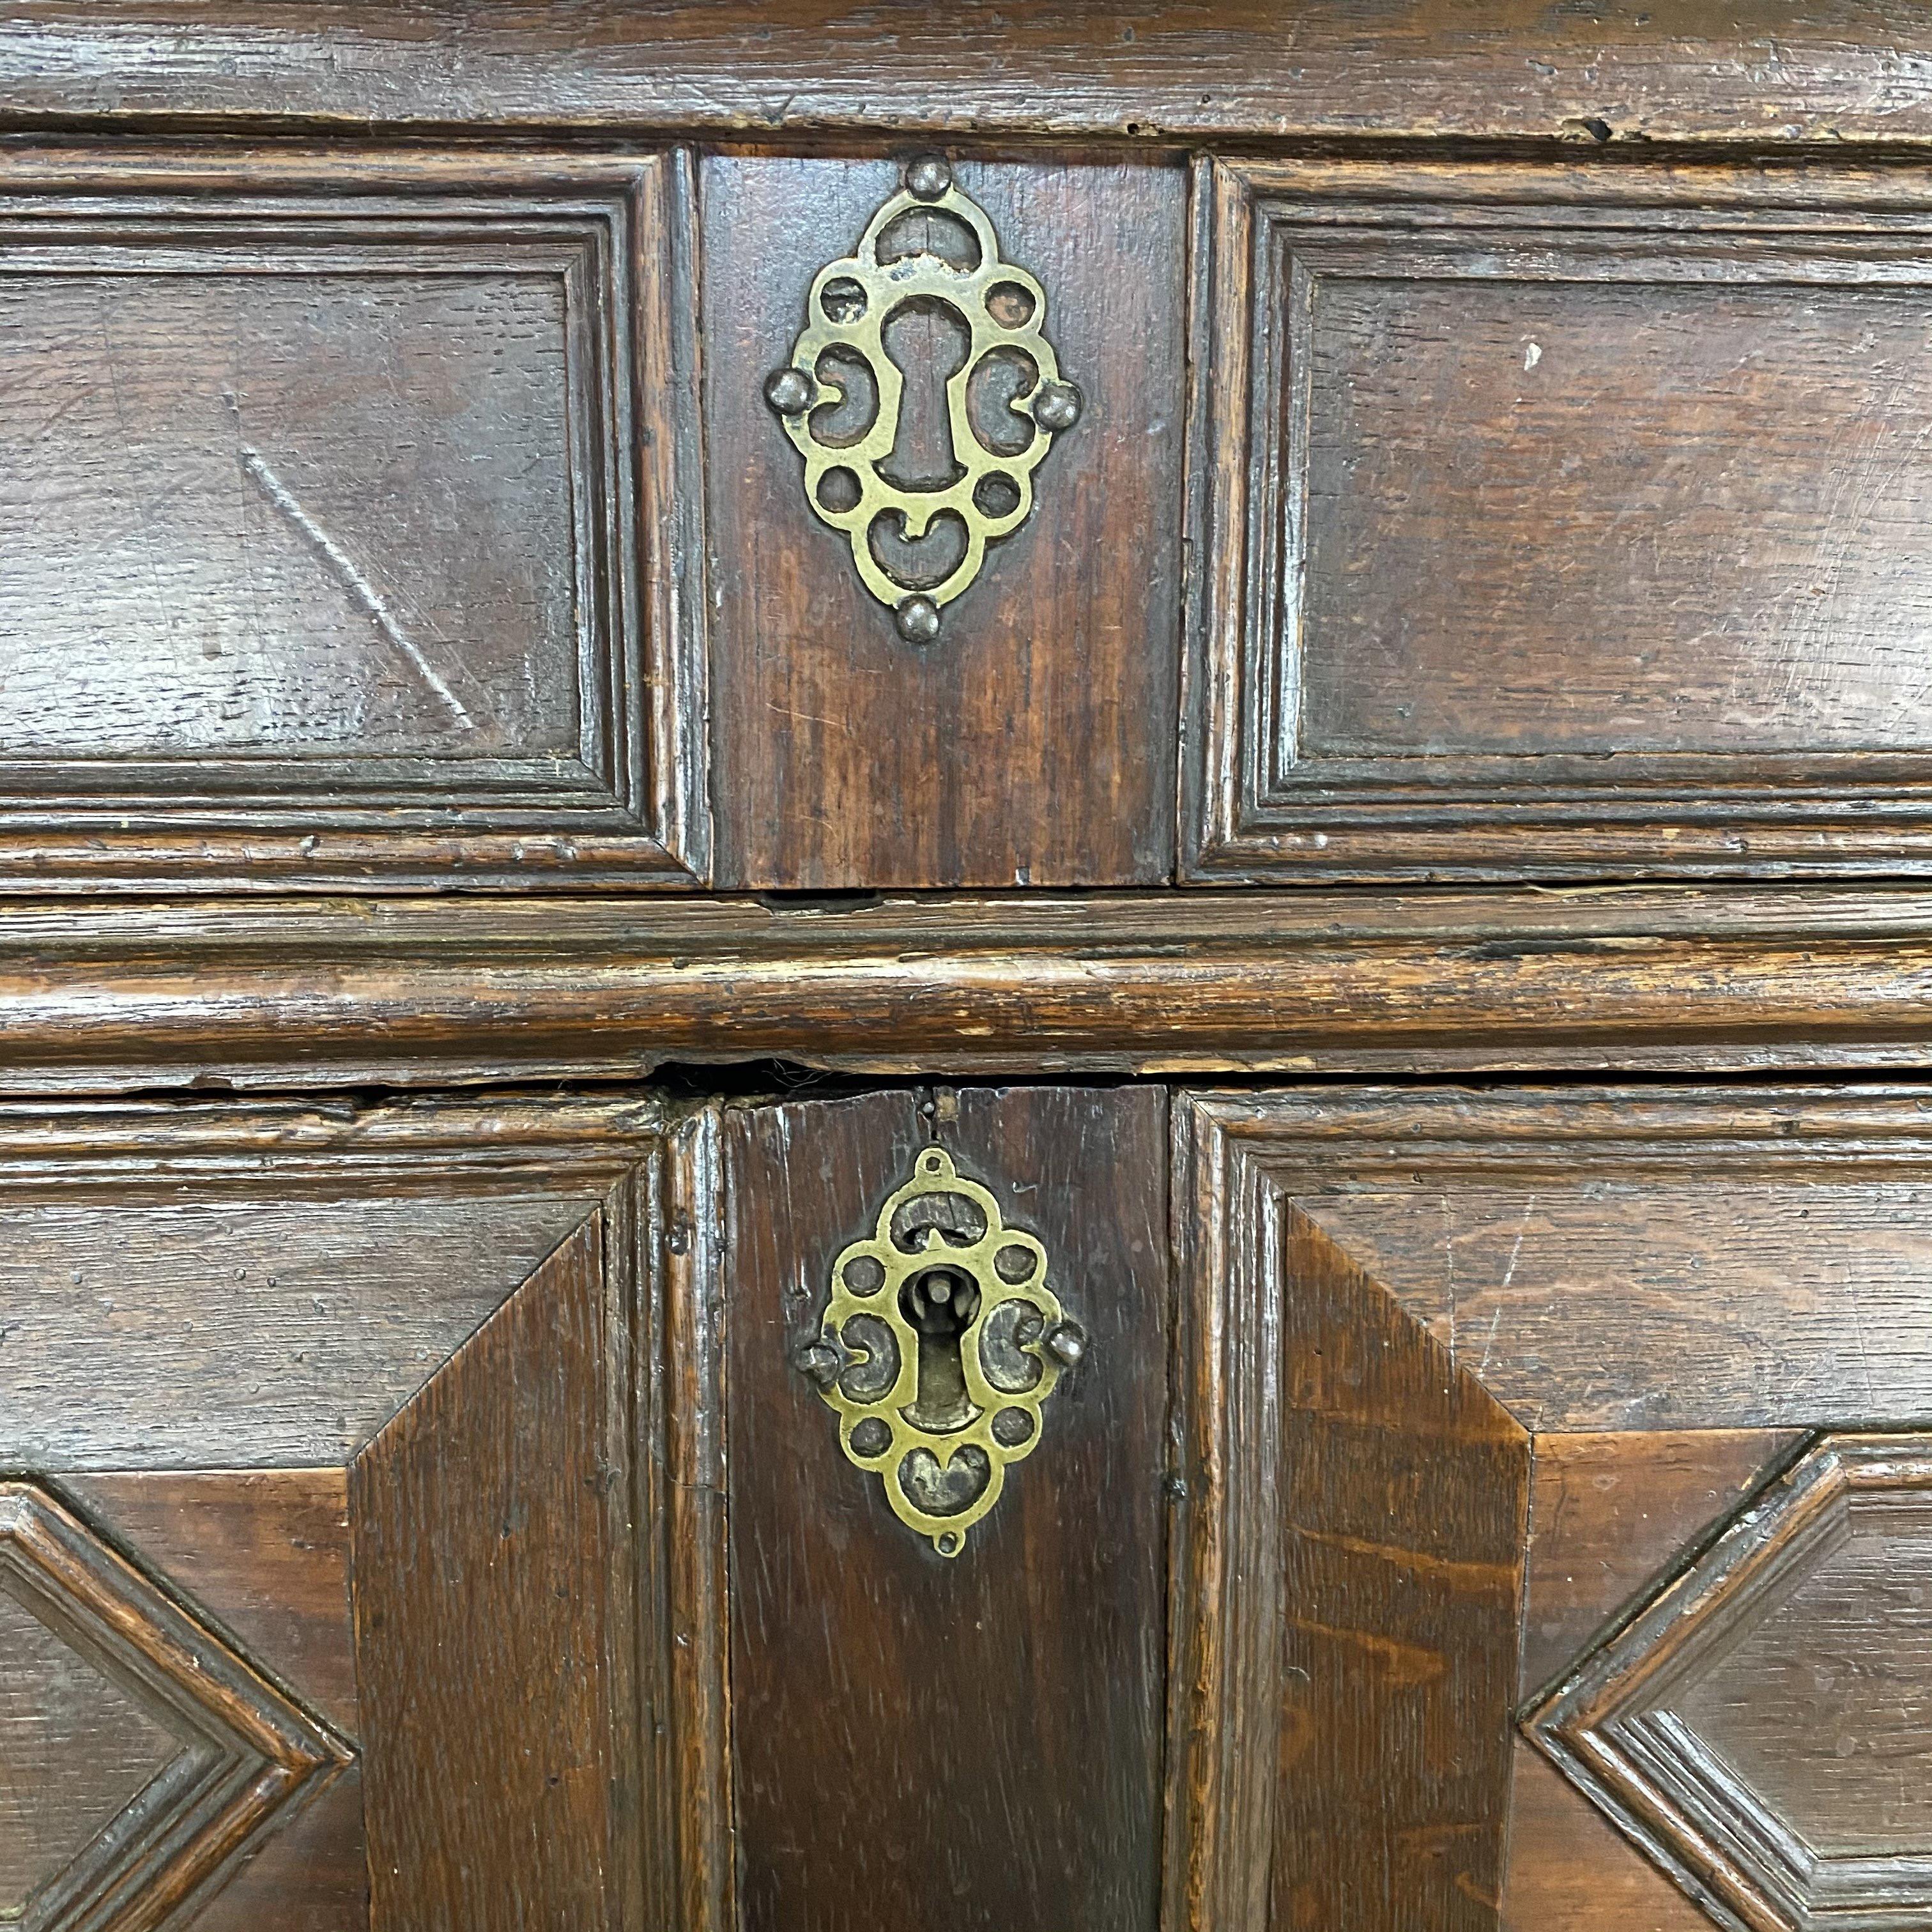 Outstanding 17th century English Charles II oak chest with drawers of varied sizes with bold geometric patterned paneled fronts, paneled sides, brass teardrop pulls, raised on carved bracket feet. Perfect as an entry hall chest, night stand, or